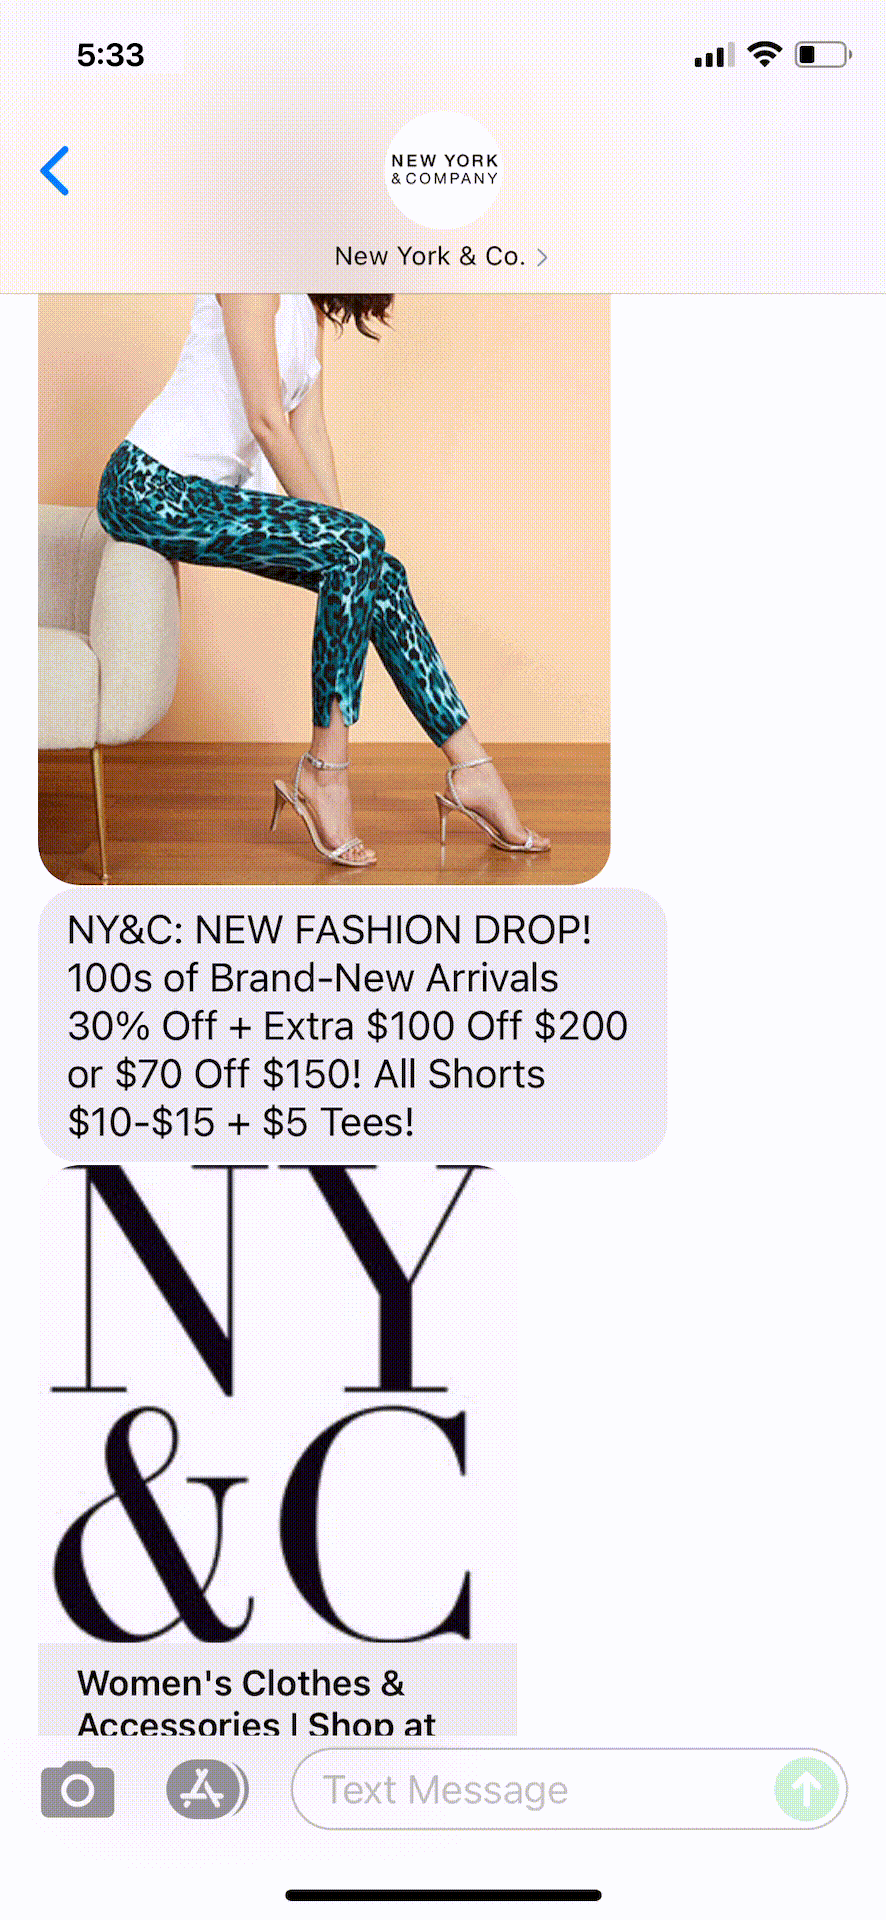 New-York-_-Co-Text-Message-Marketing-Example-07.24.2021